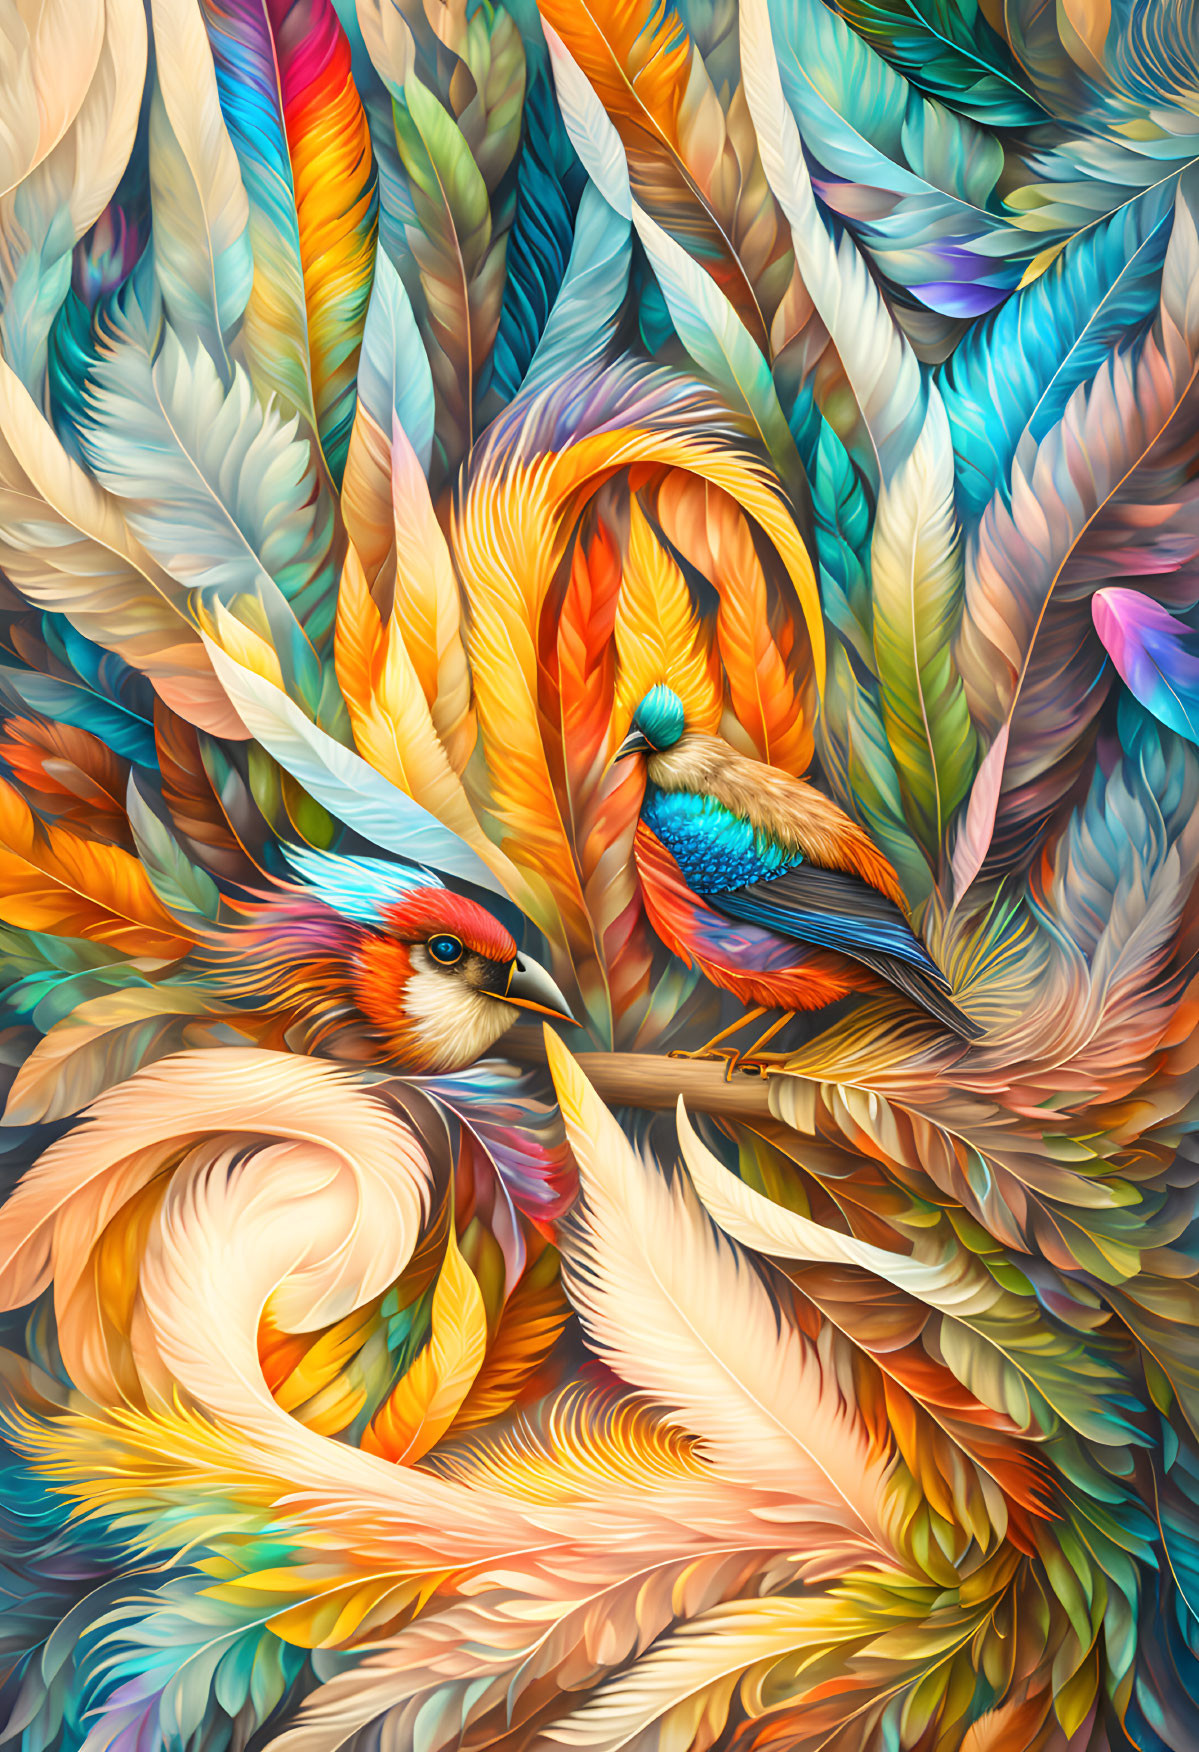 Colorful Feather and Bird Artwork with Intricate Patterns